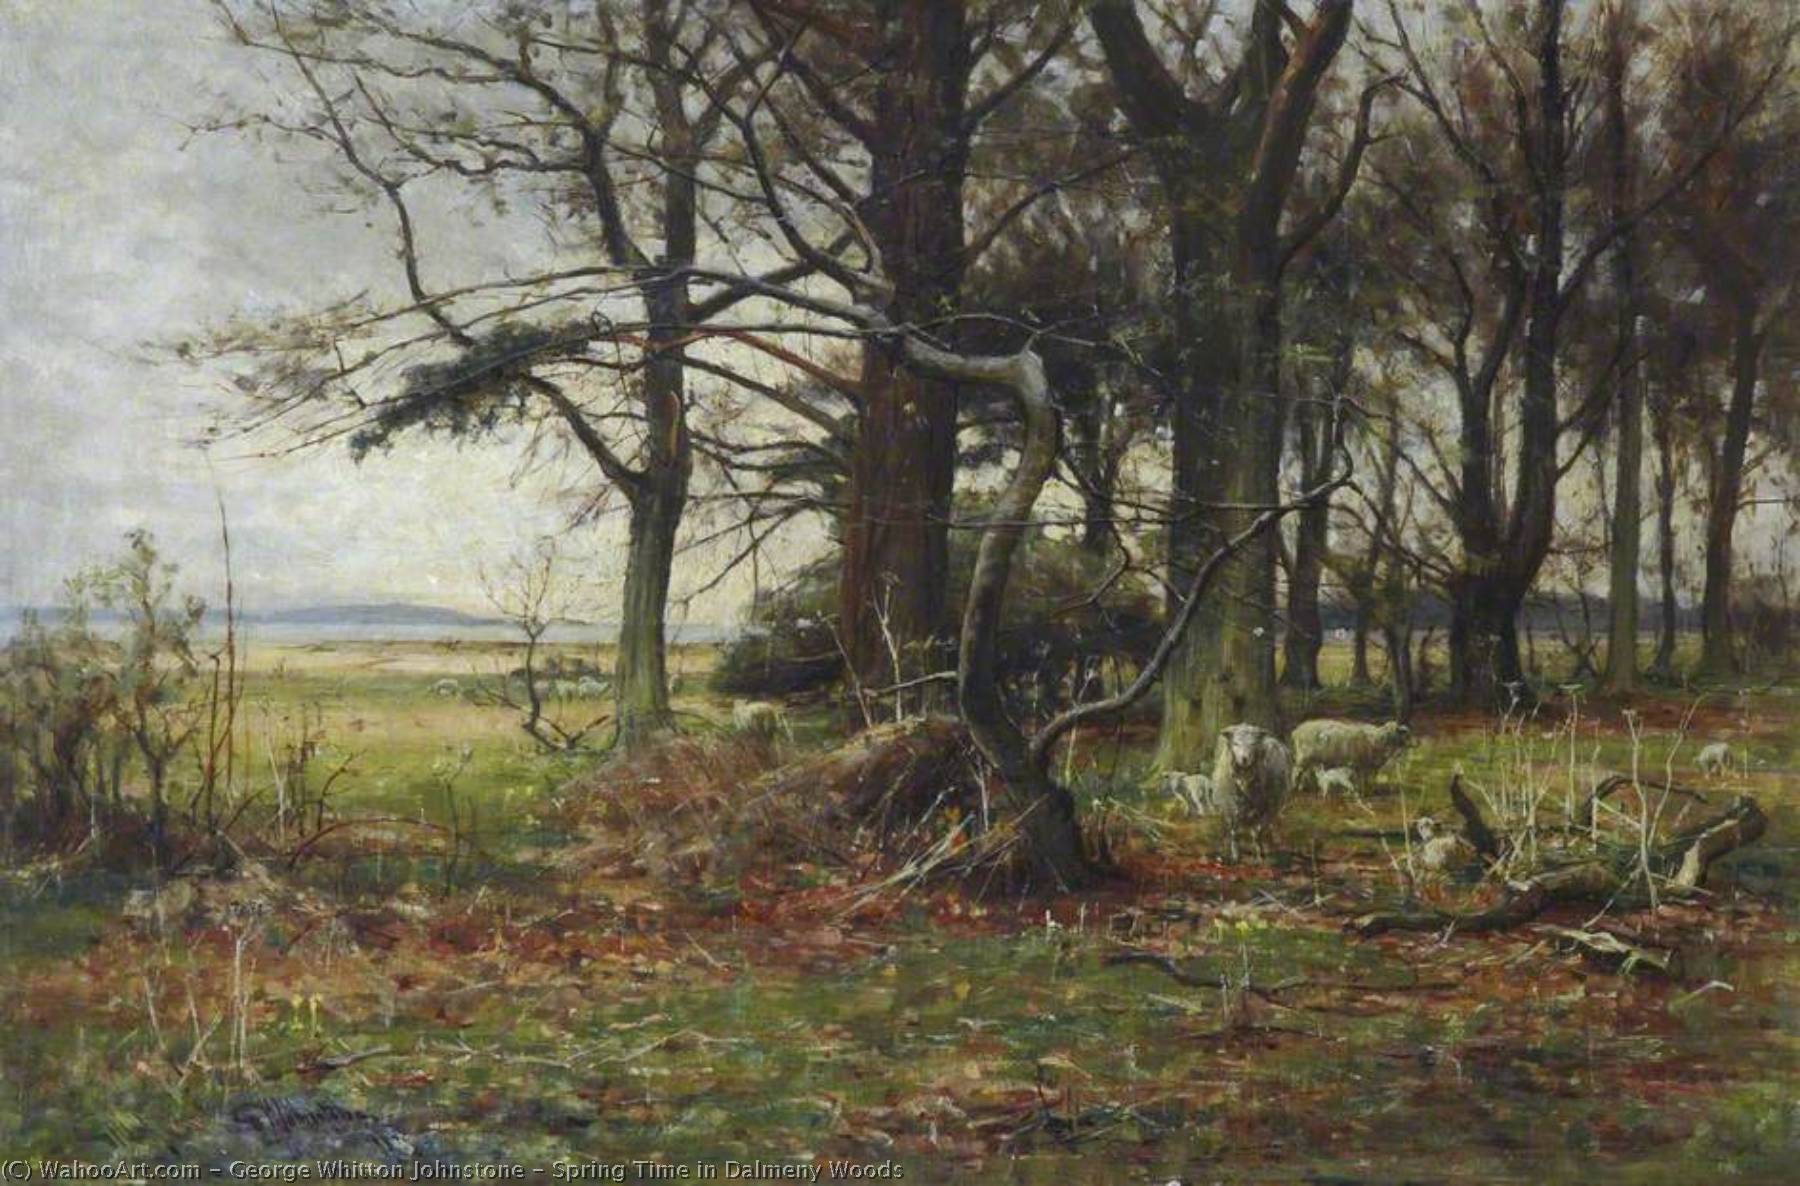 Spring Time in Dalmeny Woods by George Whitton Johnstone George Whitton Johnstone | ArtsDot.com